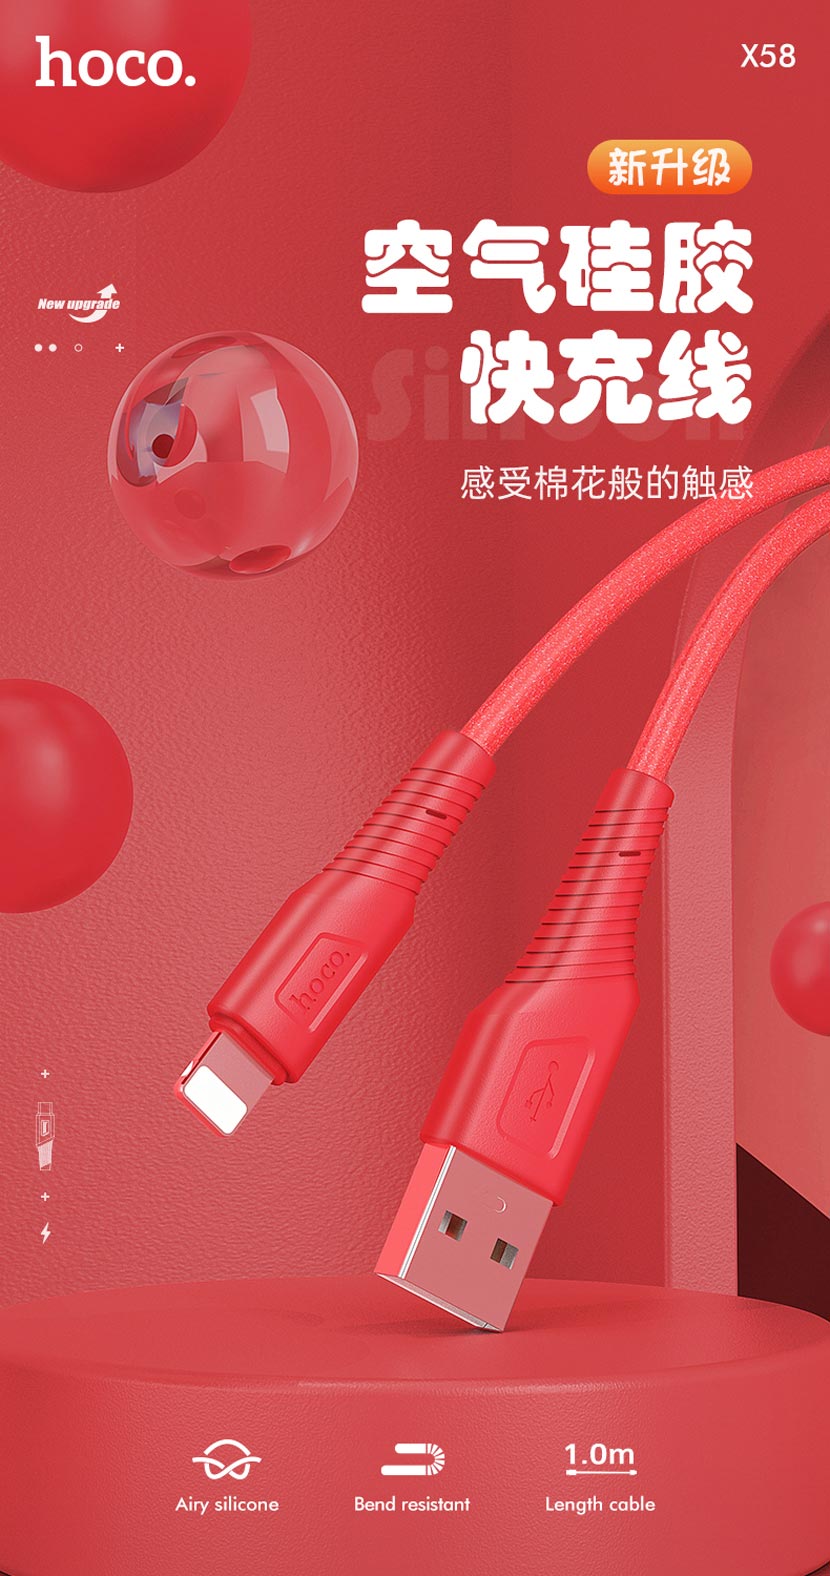 hoco news x58 airy silicone charging data cable cn